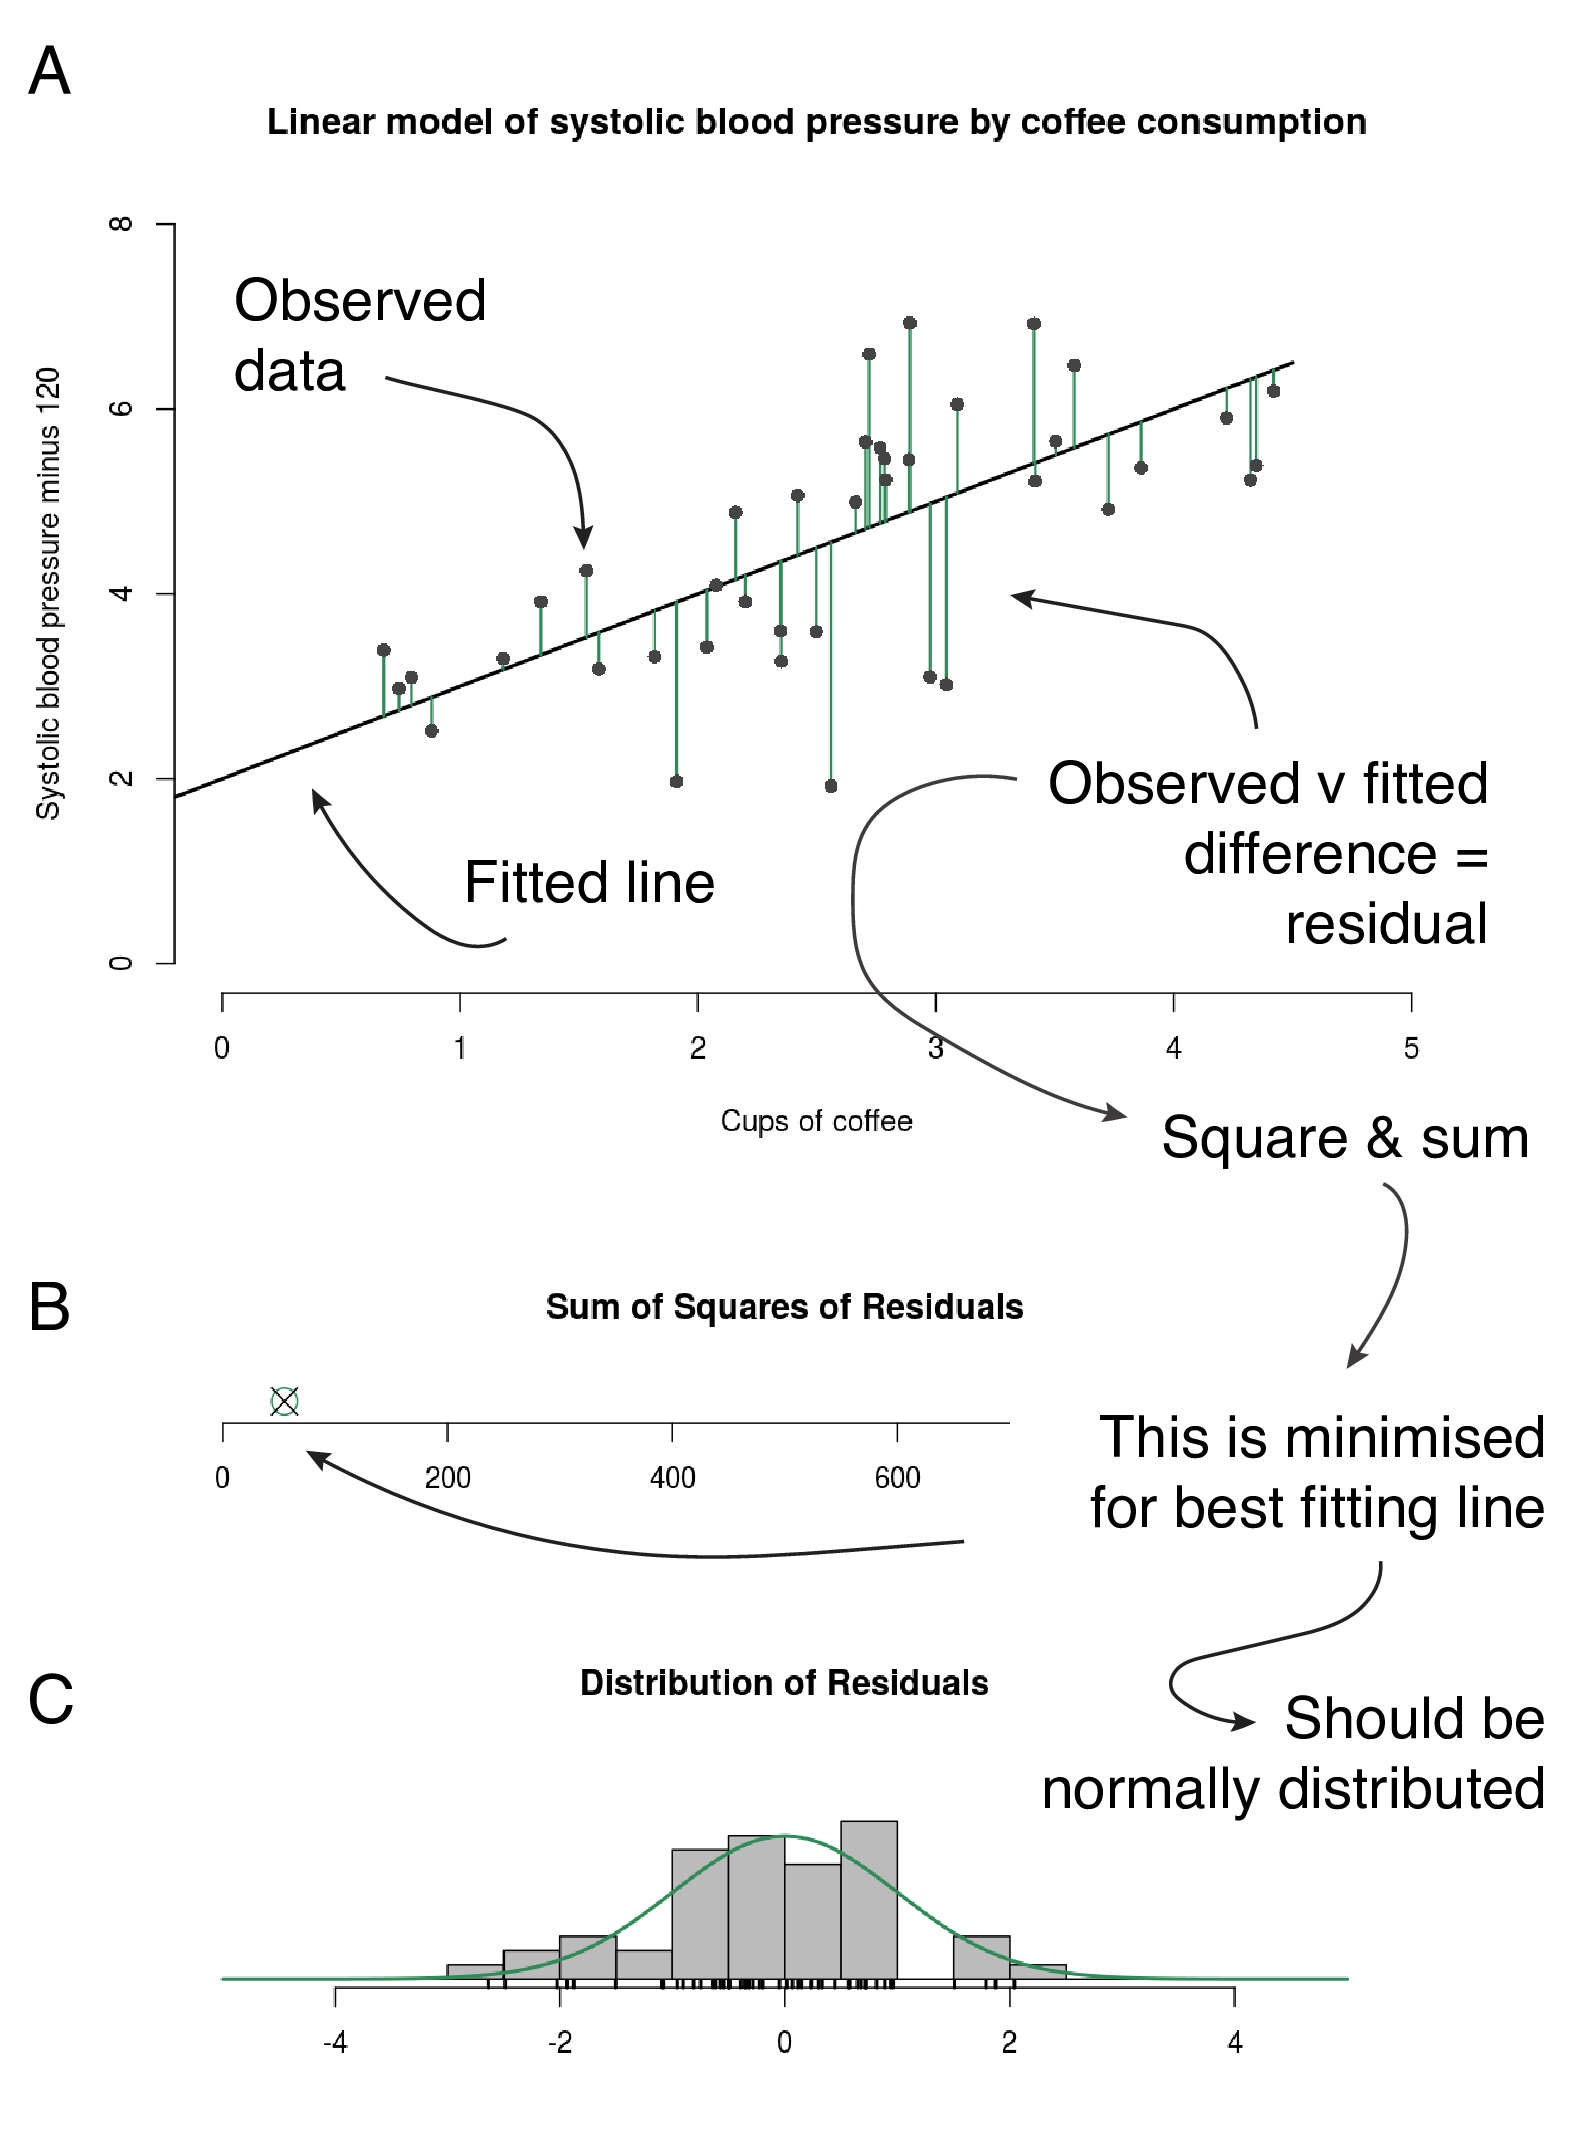 How a regression line is fitted. A - residuals are the green lines: the distance between each data point and the fitted line. B - the green circle indicates the minimum for these data; its absolute value is not meaningful or comparable with other datasets. Follow the "simple regression Shiny app" link to interact with the fitted line. A new sum of squares of residuals (the black cross) is calculated every time you move the line. C - Distribution of the residuals. App and plots adapted from https://github.com/mwaskom/ShinyApps with permission.